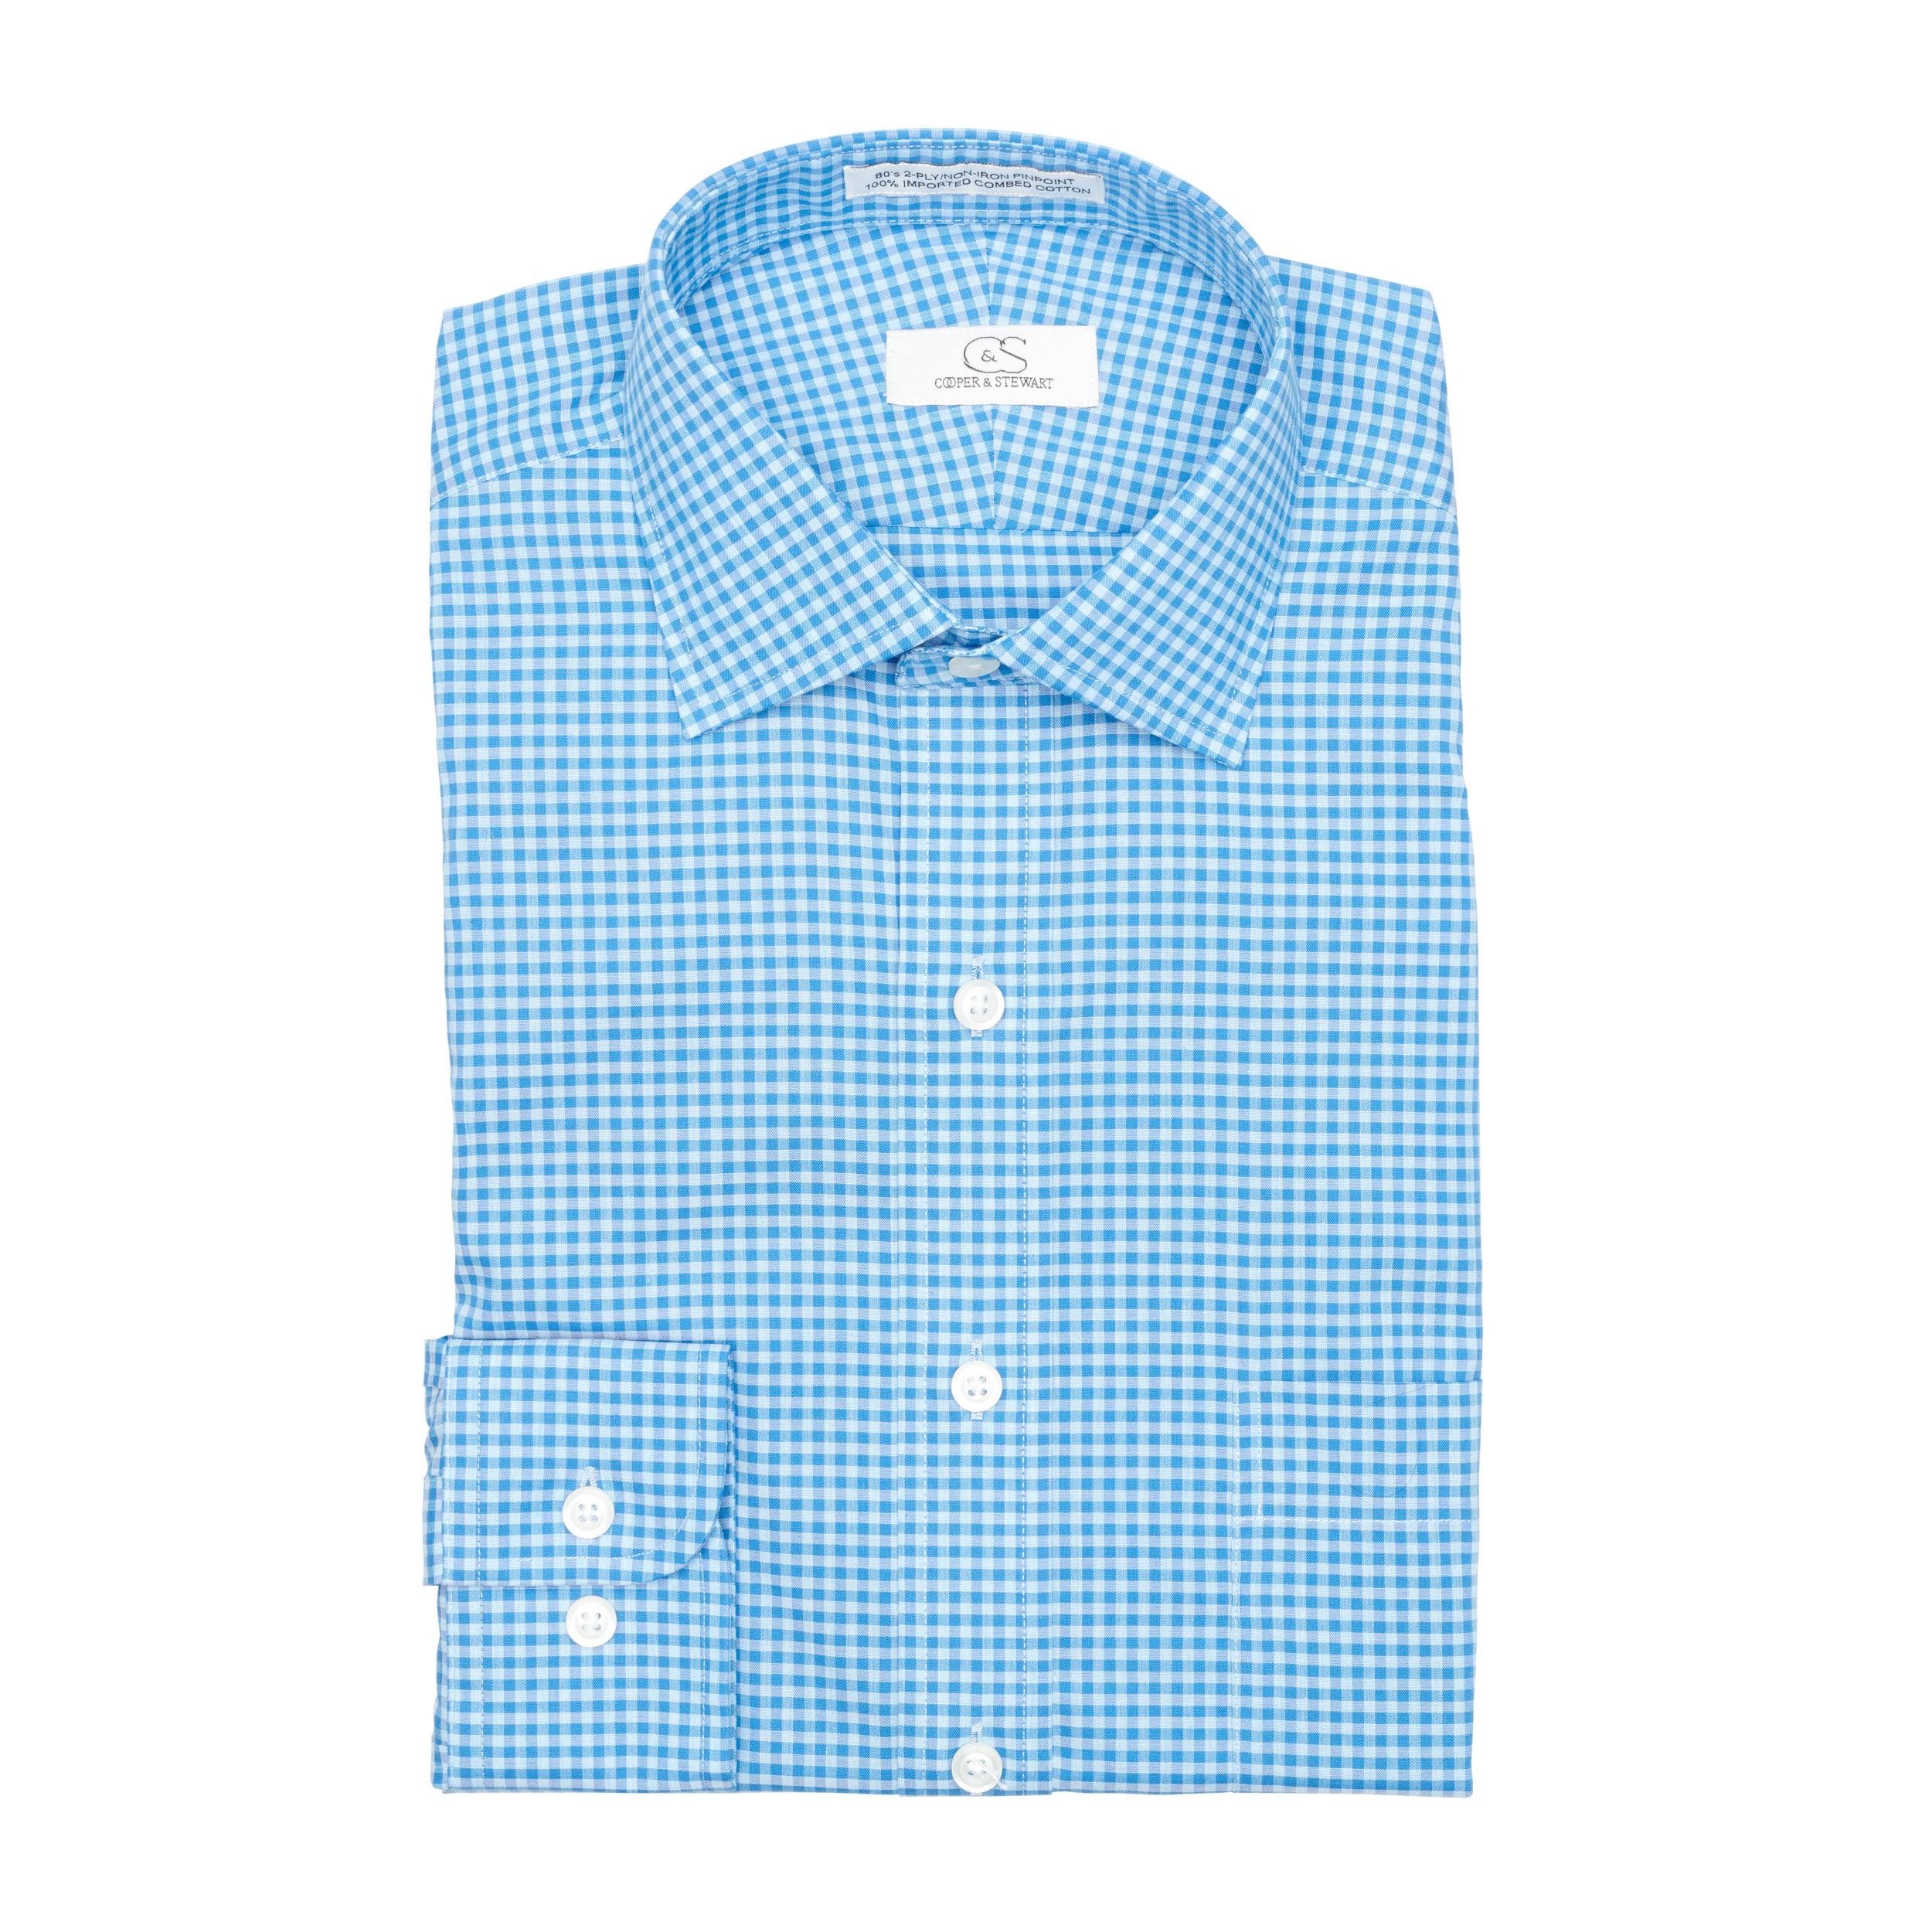 125 SC - Turquoise Filled Gingham Check Spread Collar